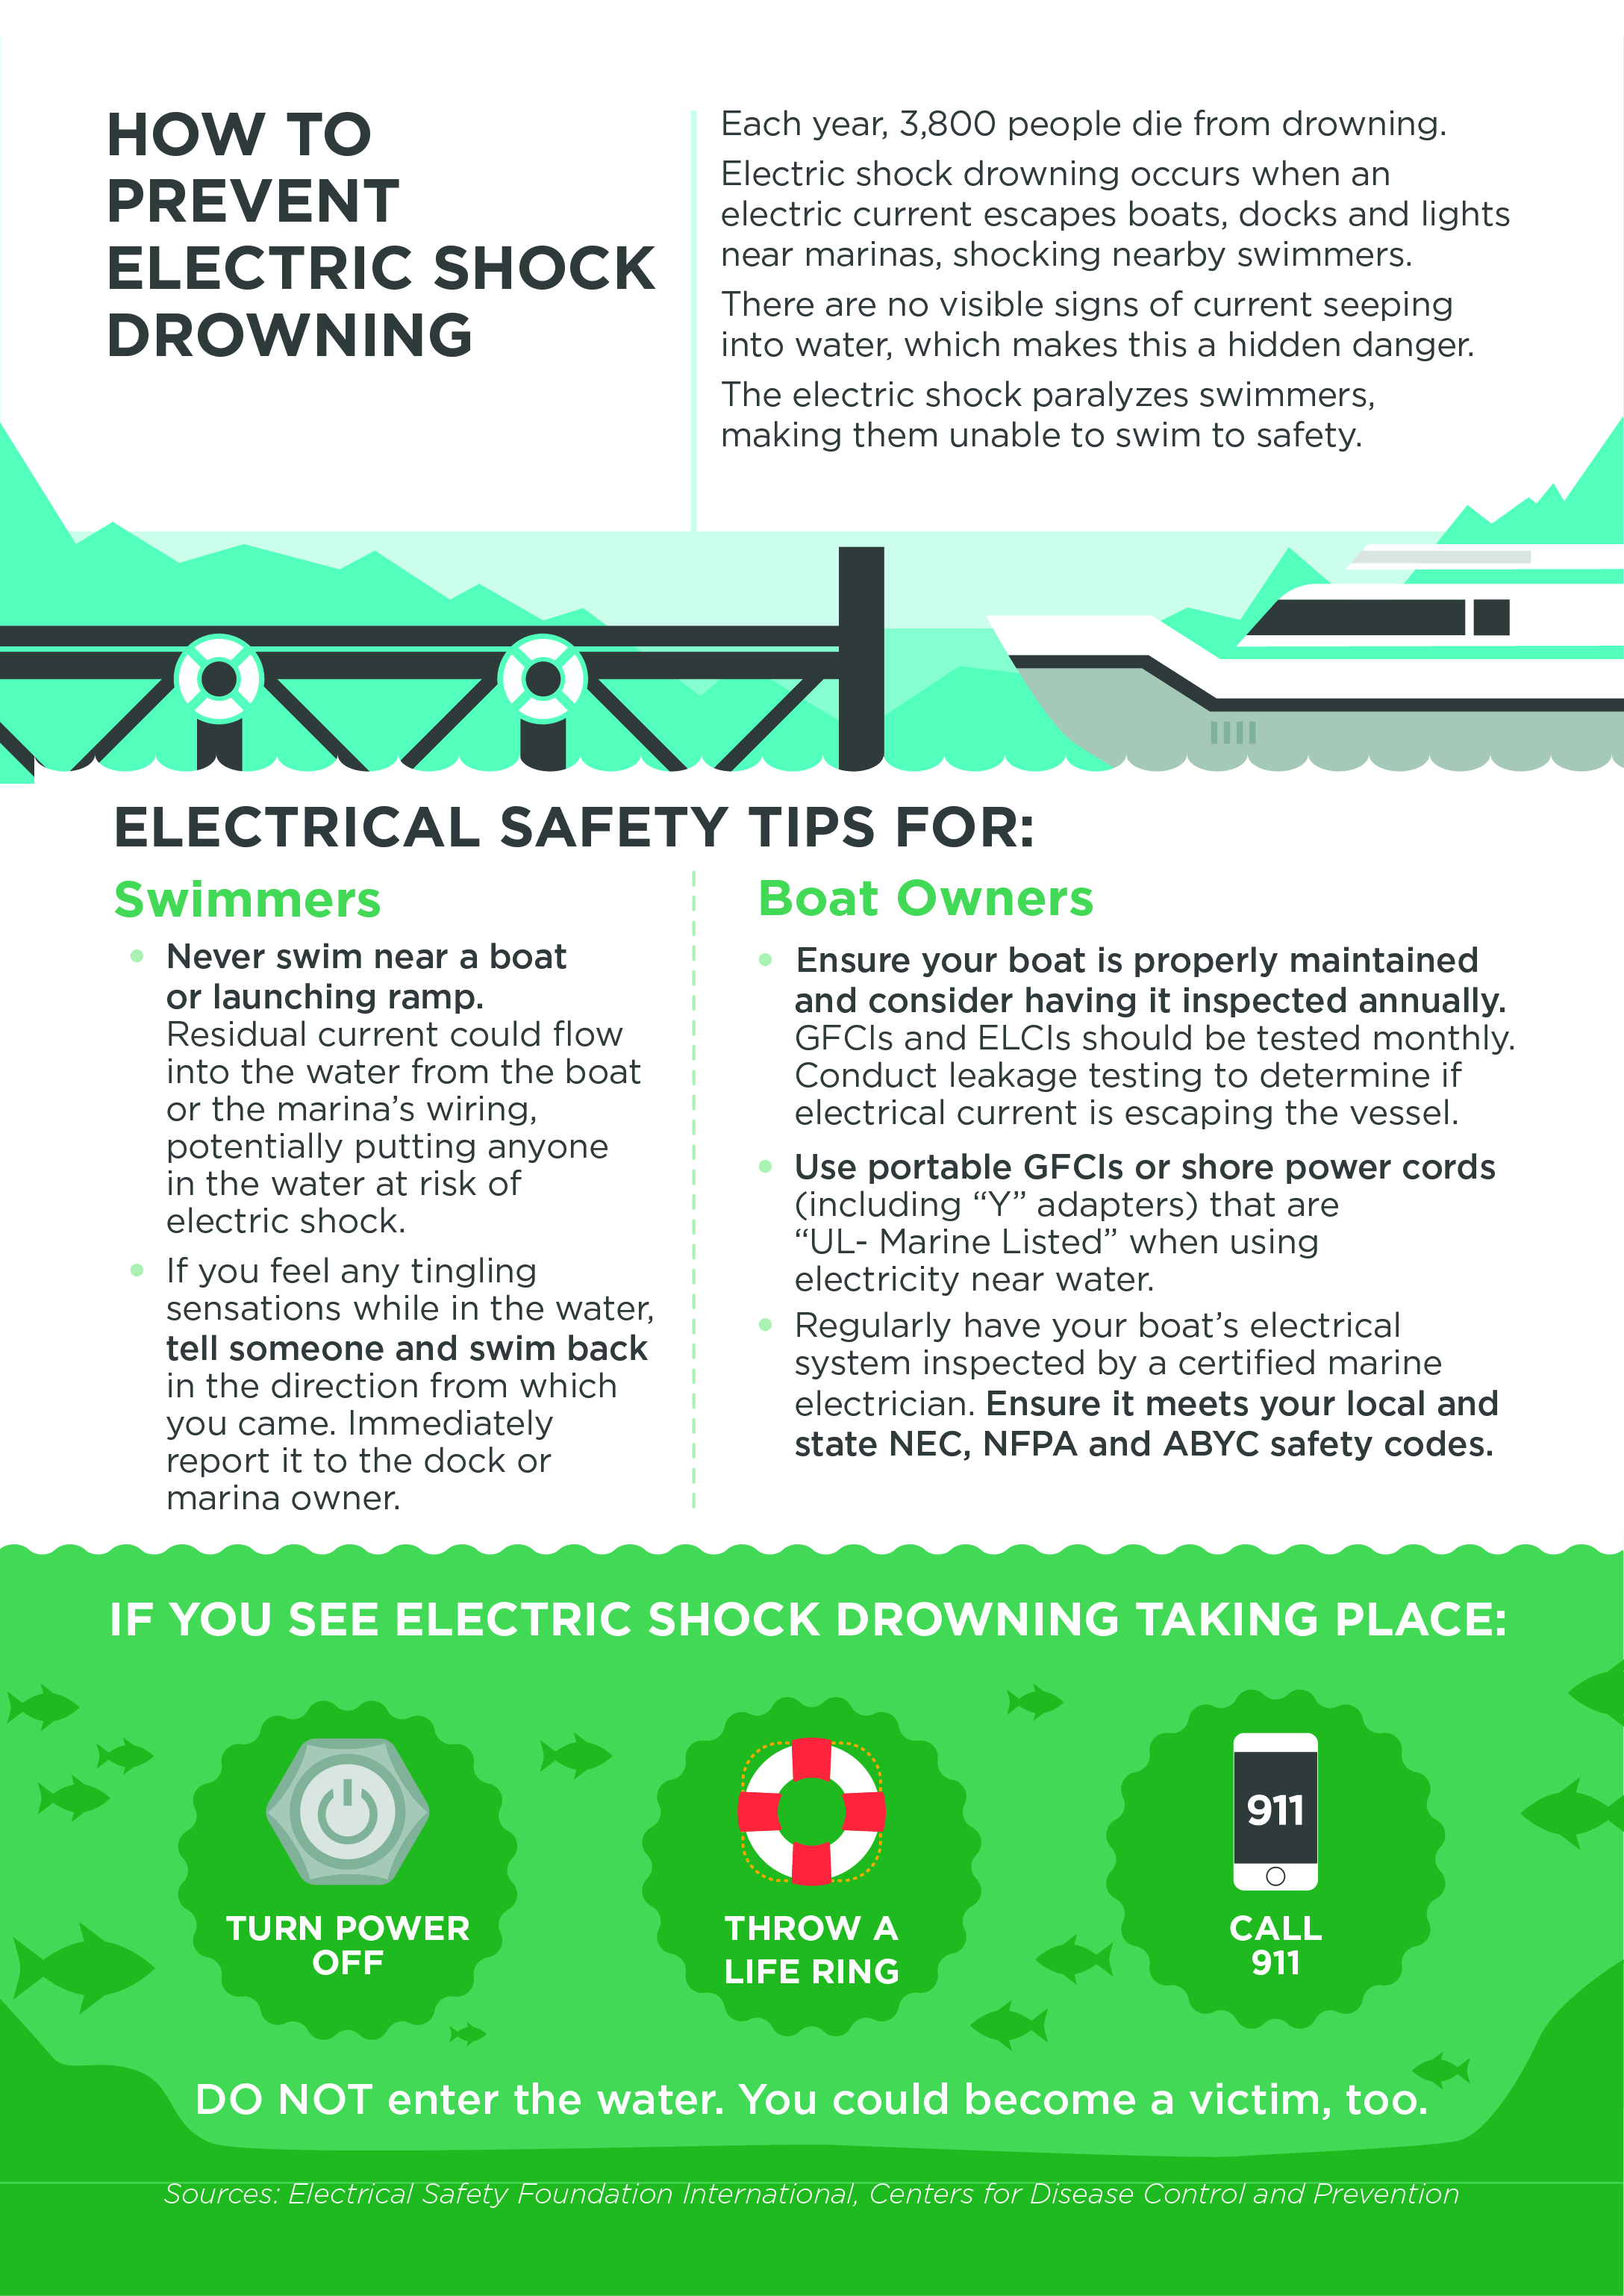 Be aware of electrical shock drowning